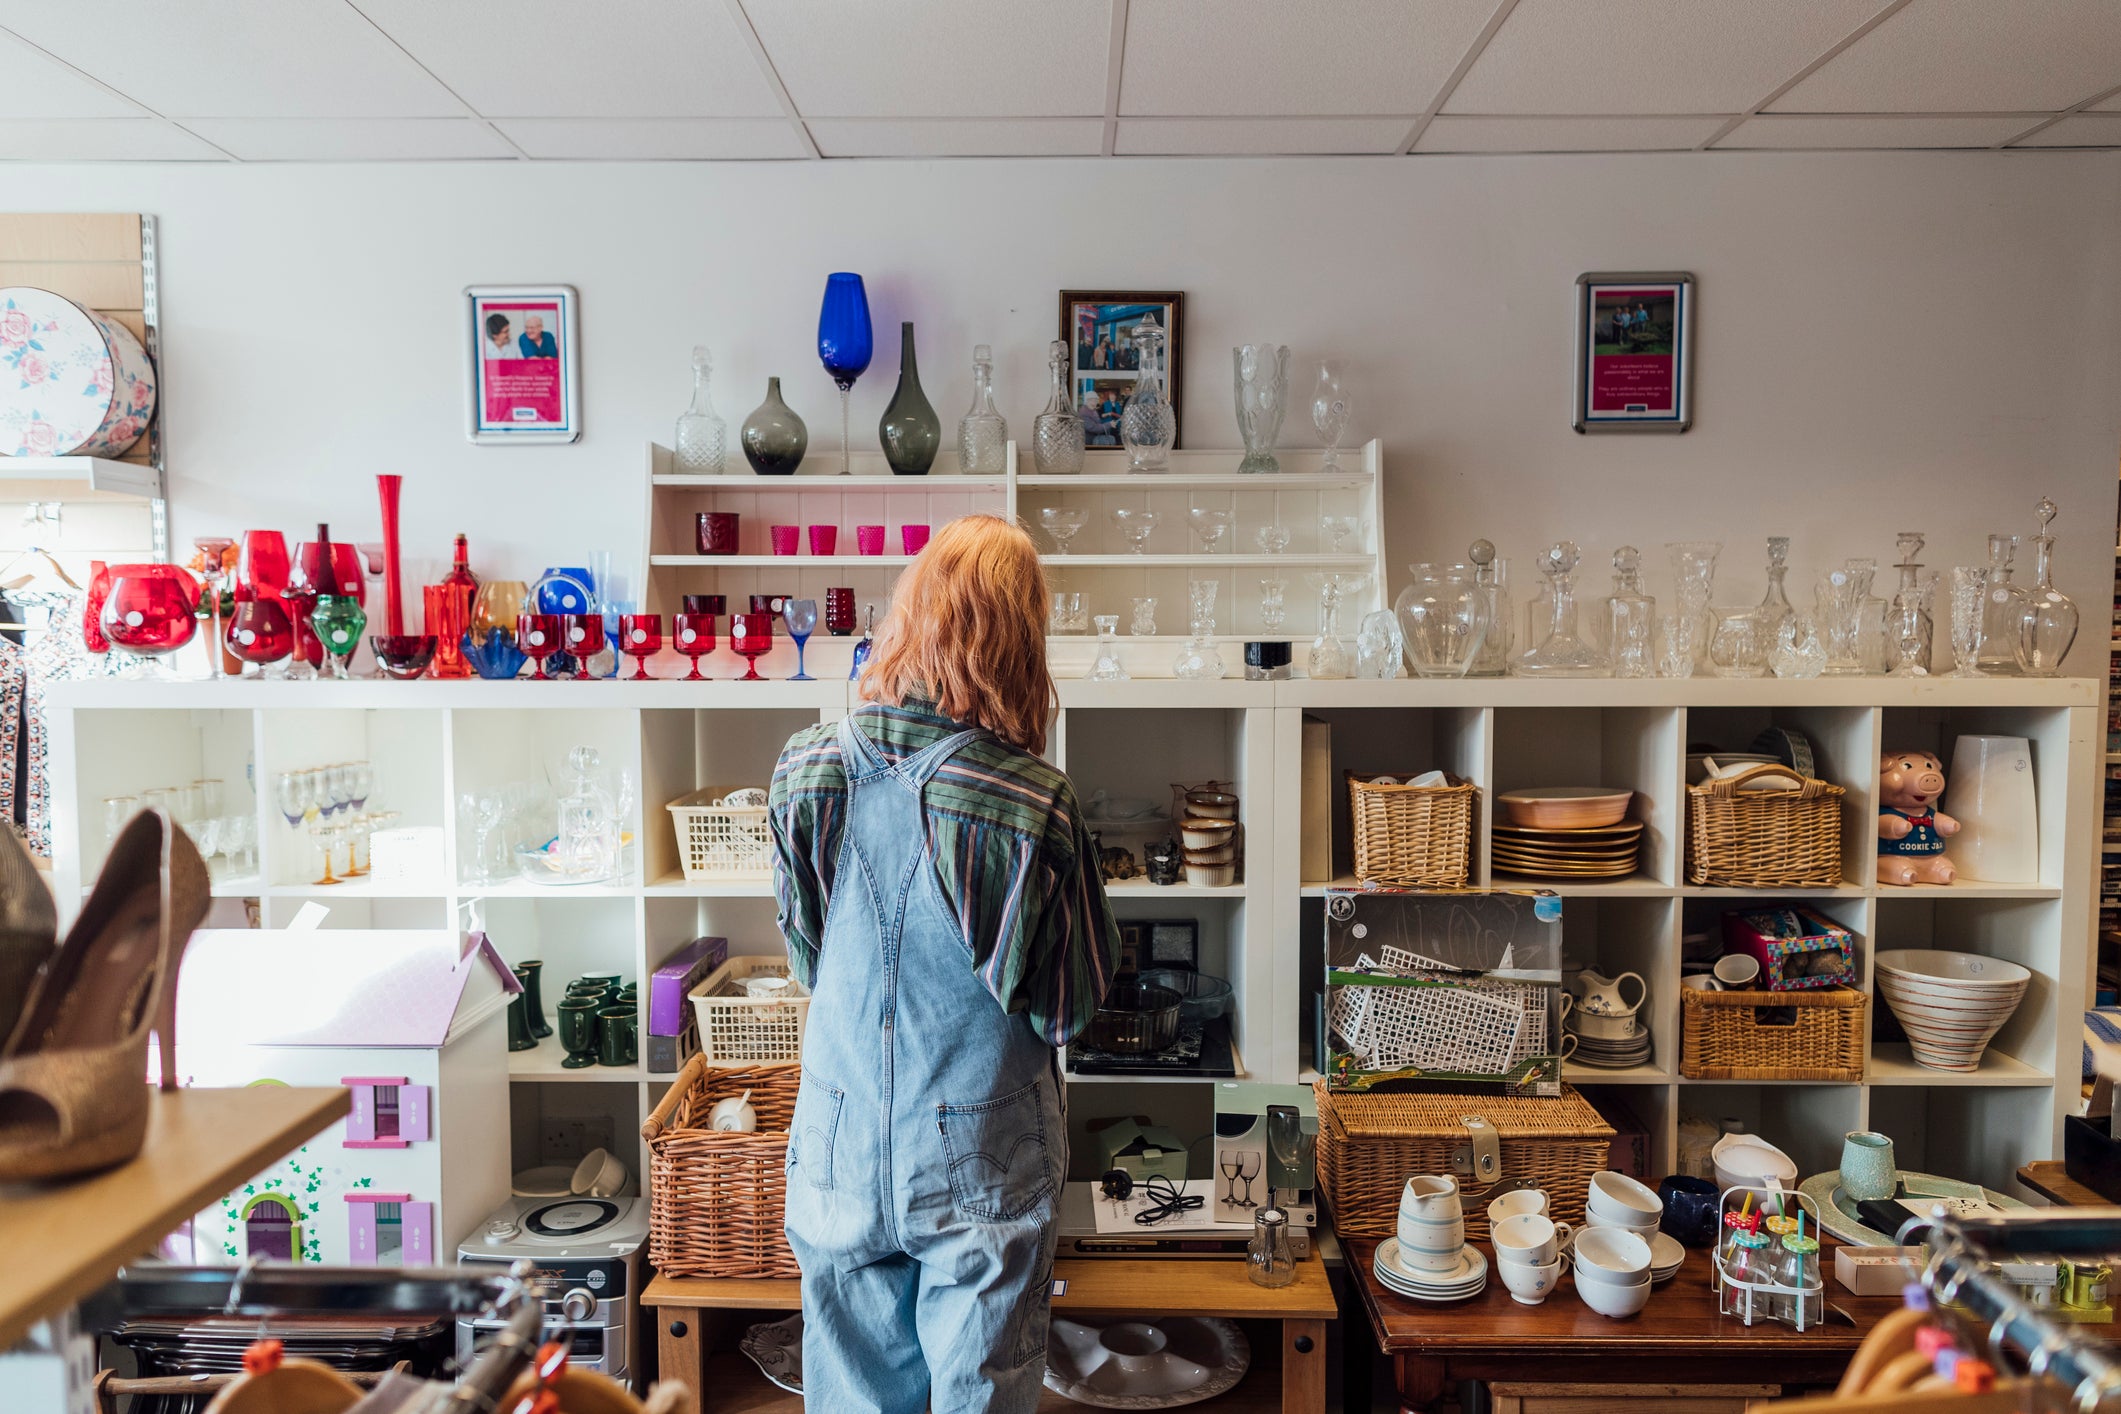 Many charity shops have undergone a transformation, becoming light, bright and pleasant places to visit